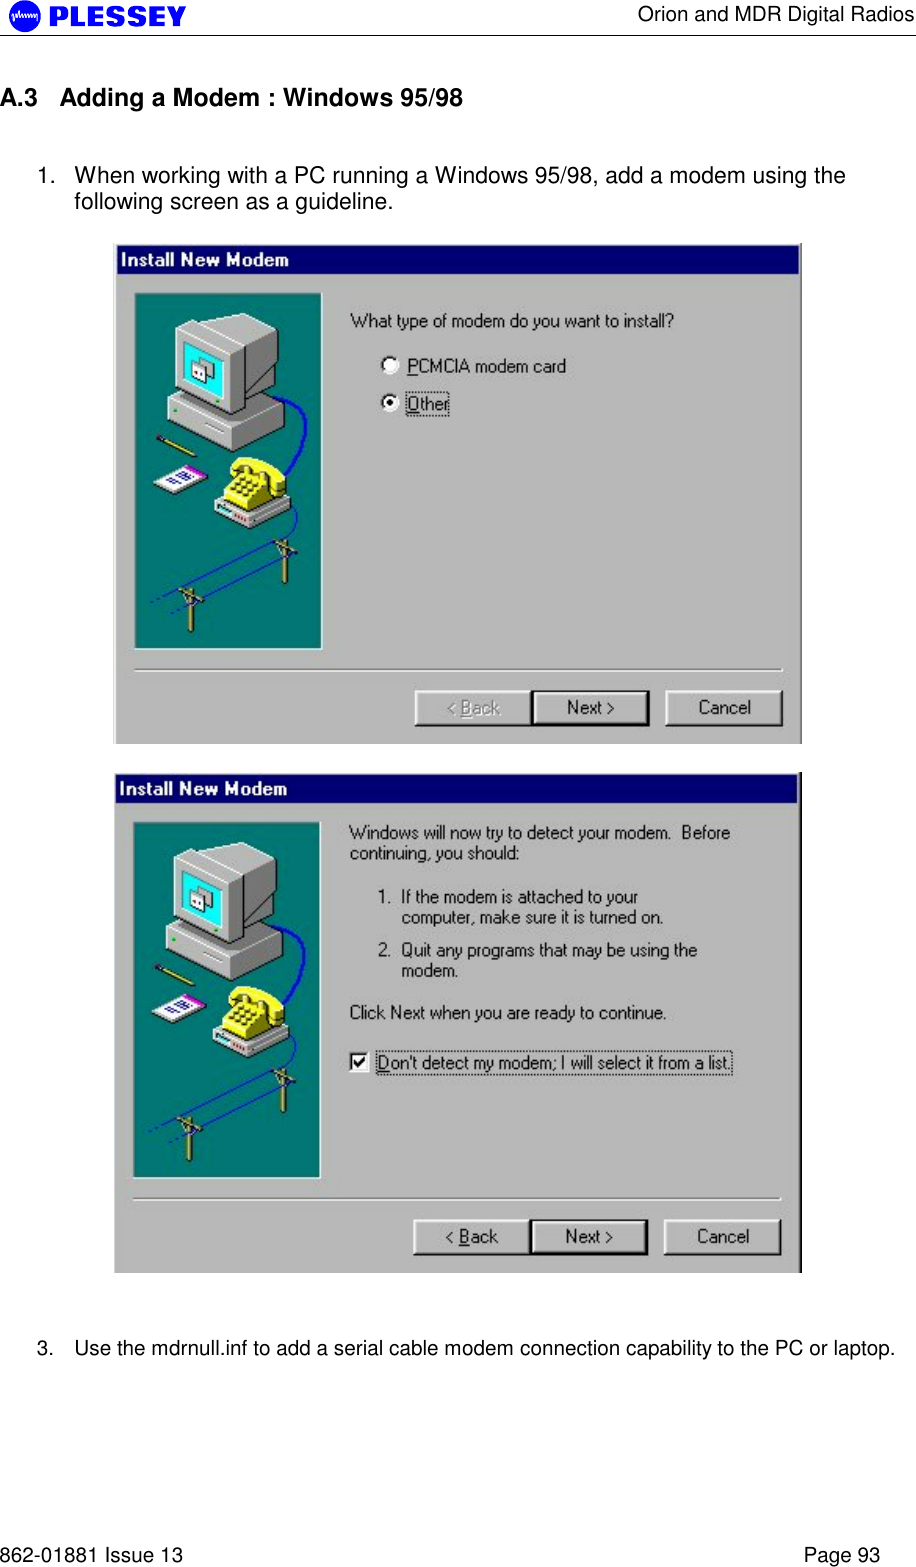      Orion and MDR Digital Radios   862-01881 Issue 13    Page 93 A.3  Adding a Modem : Windows 95/98  1.  When working with a PC running a Windows 95/98, add a modem using the following screen as a guideline.       3.  Use the mdrnull.inf to add a serial cable modem connection capability to the PC or laptop.  